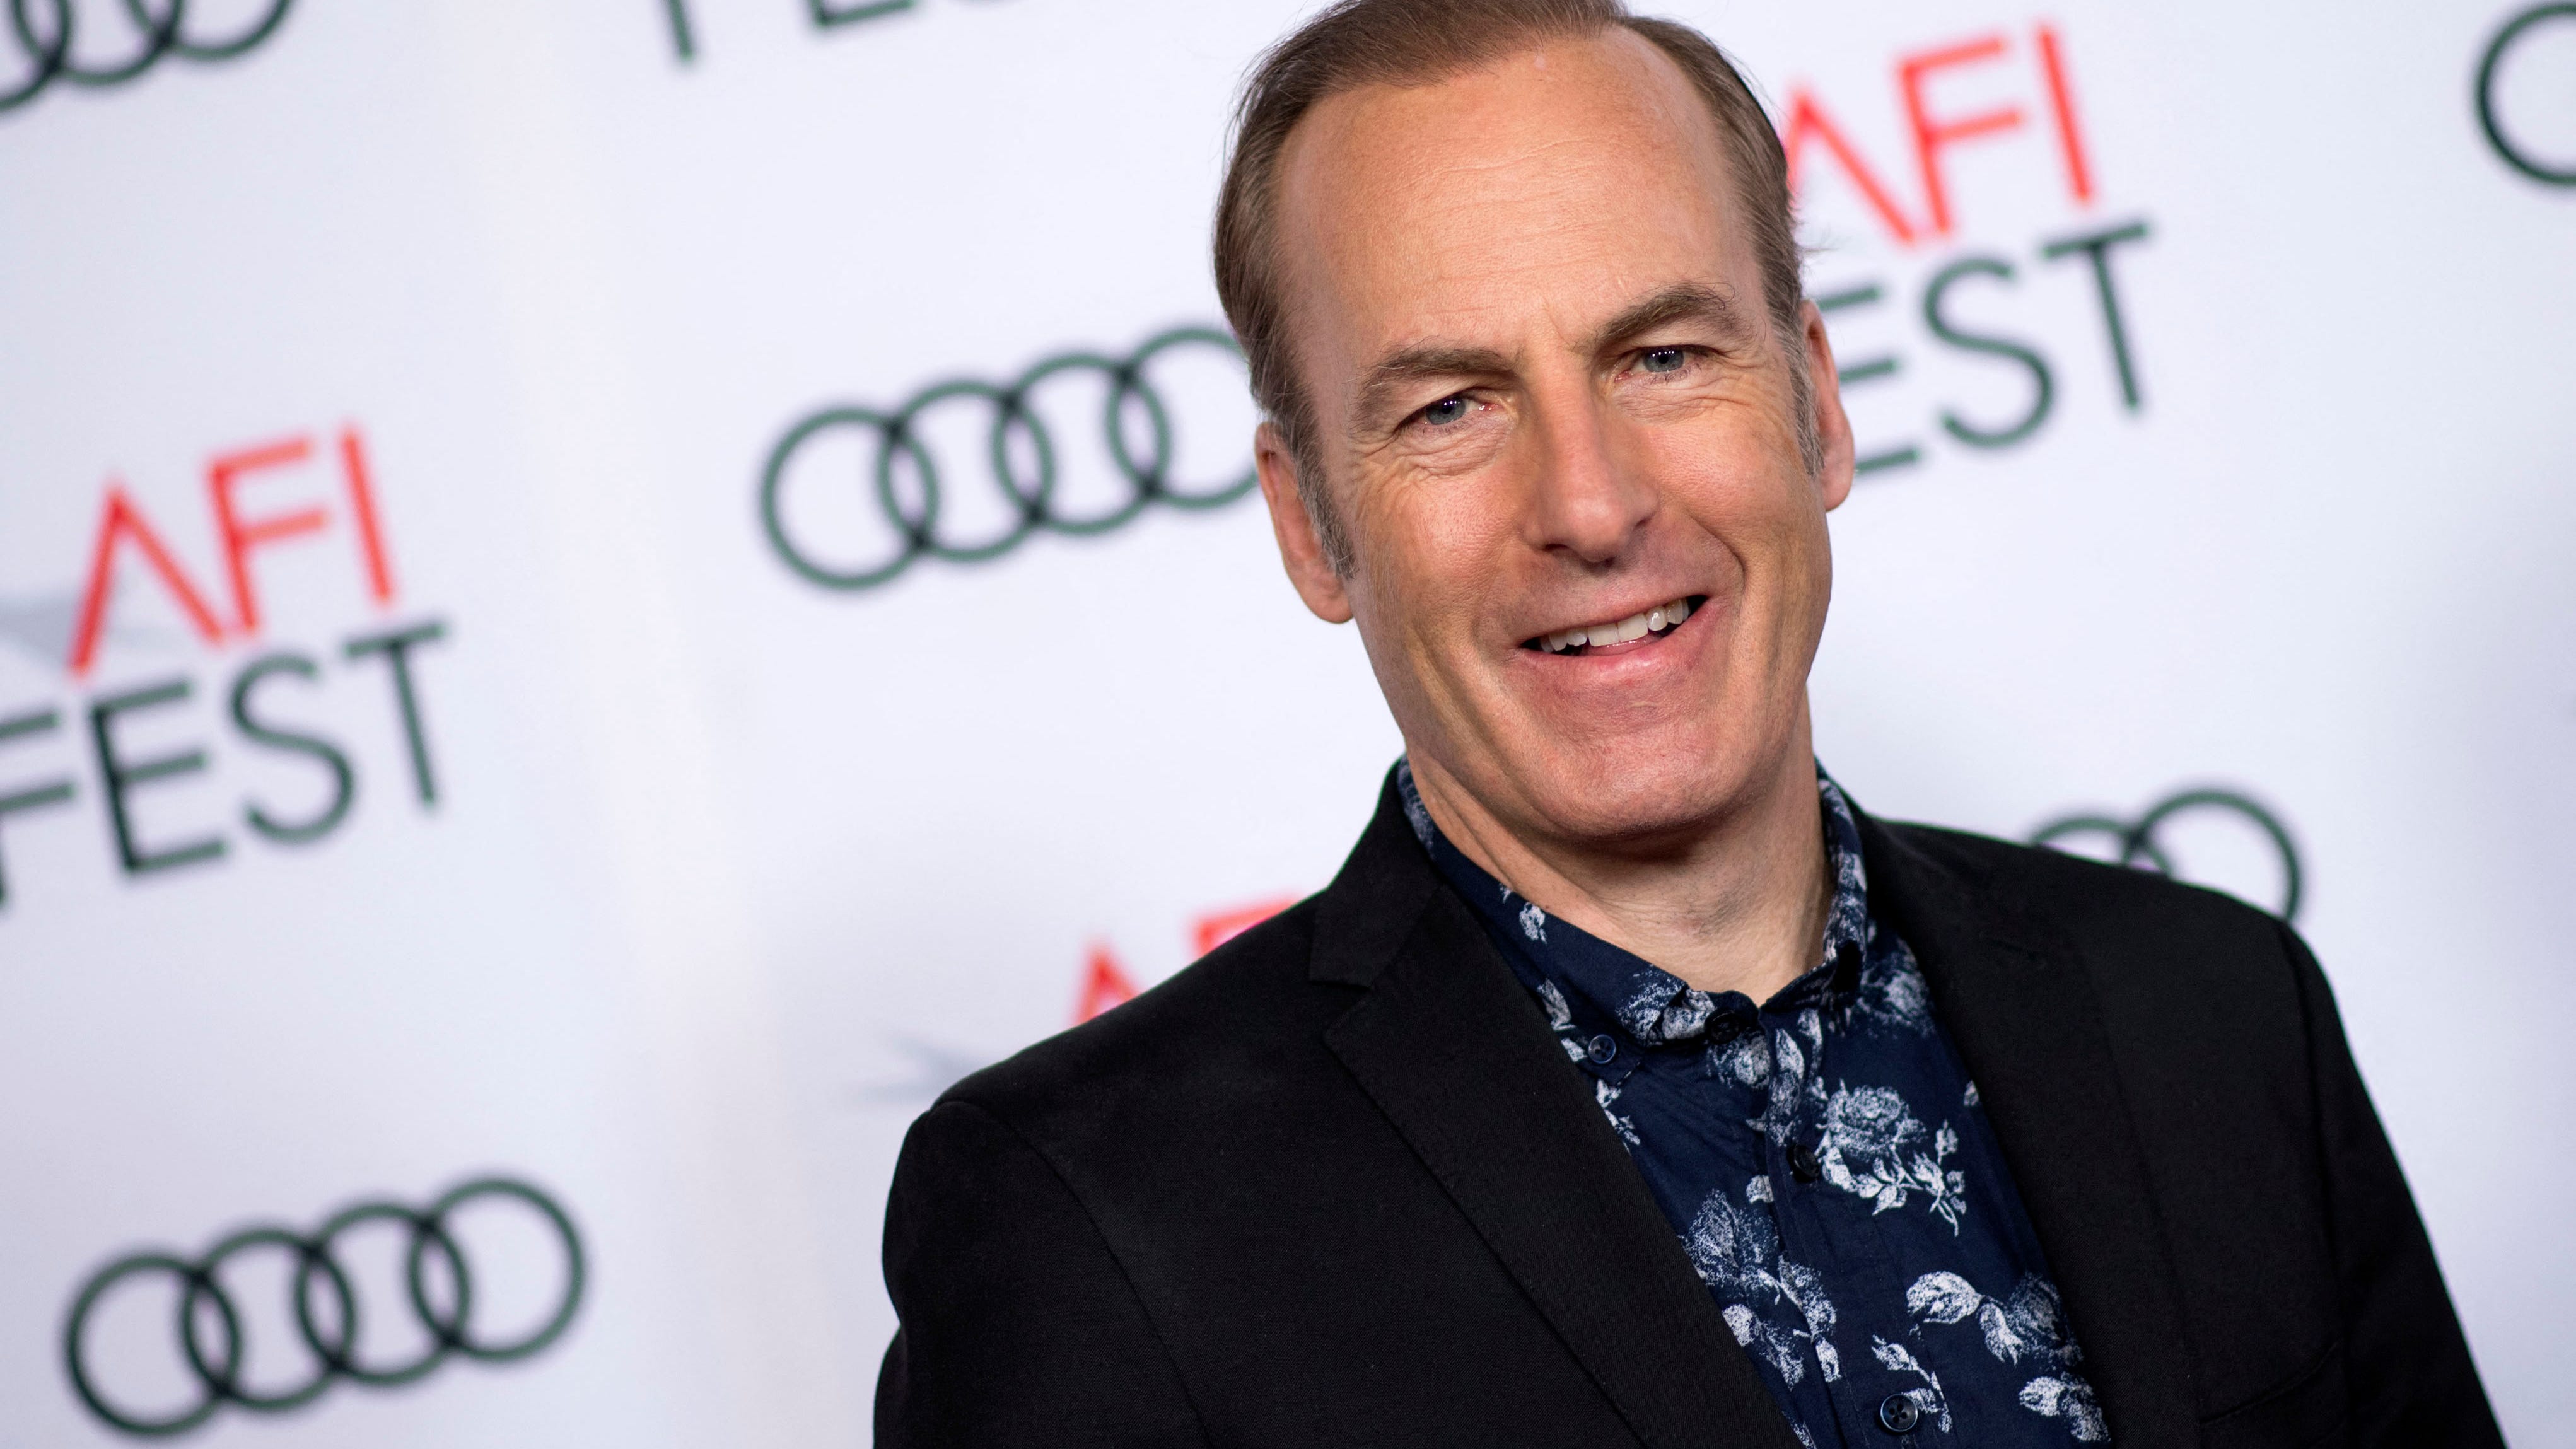 Bob Odenkirk was rushed to hospital after collapsing on the set of popular television drama "Better Call Saul."